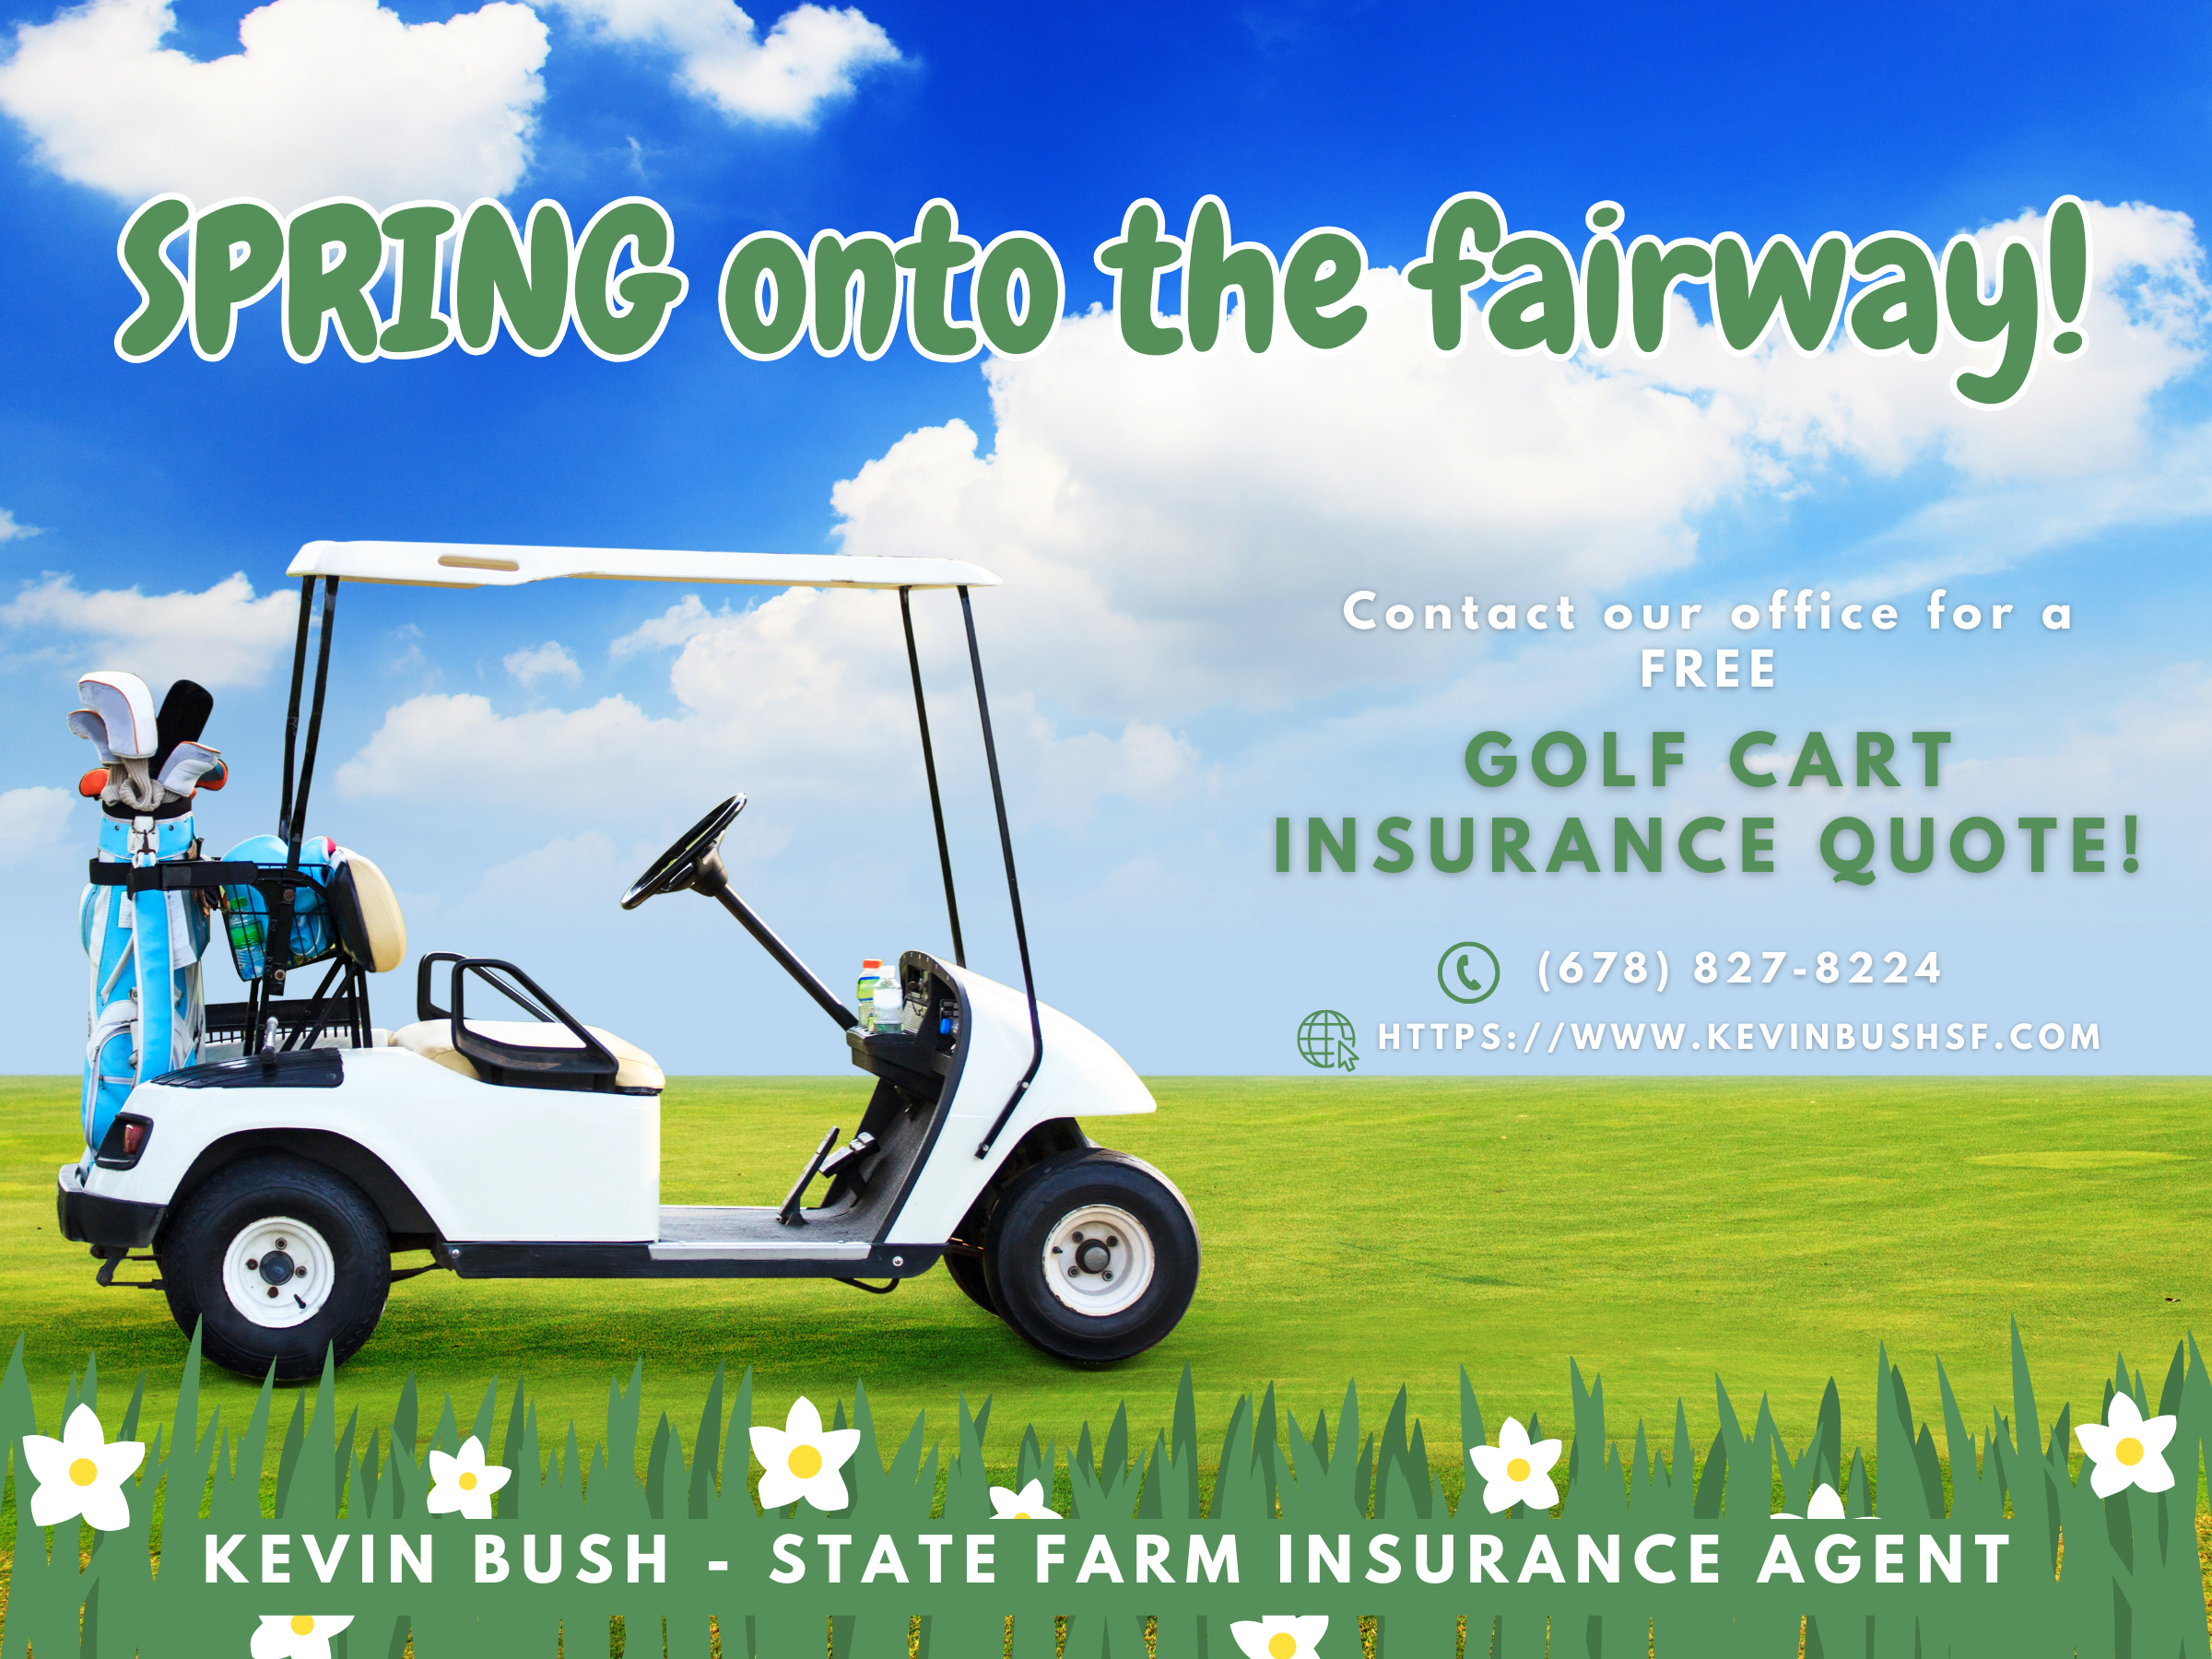 Spring has sprung, and so has the golf season! We are here to ensure your golf cart is protected on and off the course. Reach out to our State Farm Insurance Agency for golf cart insurance today!